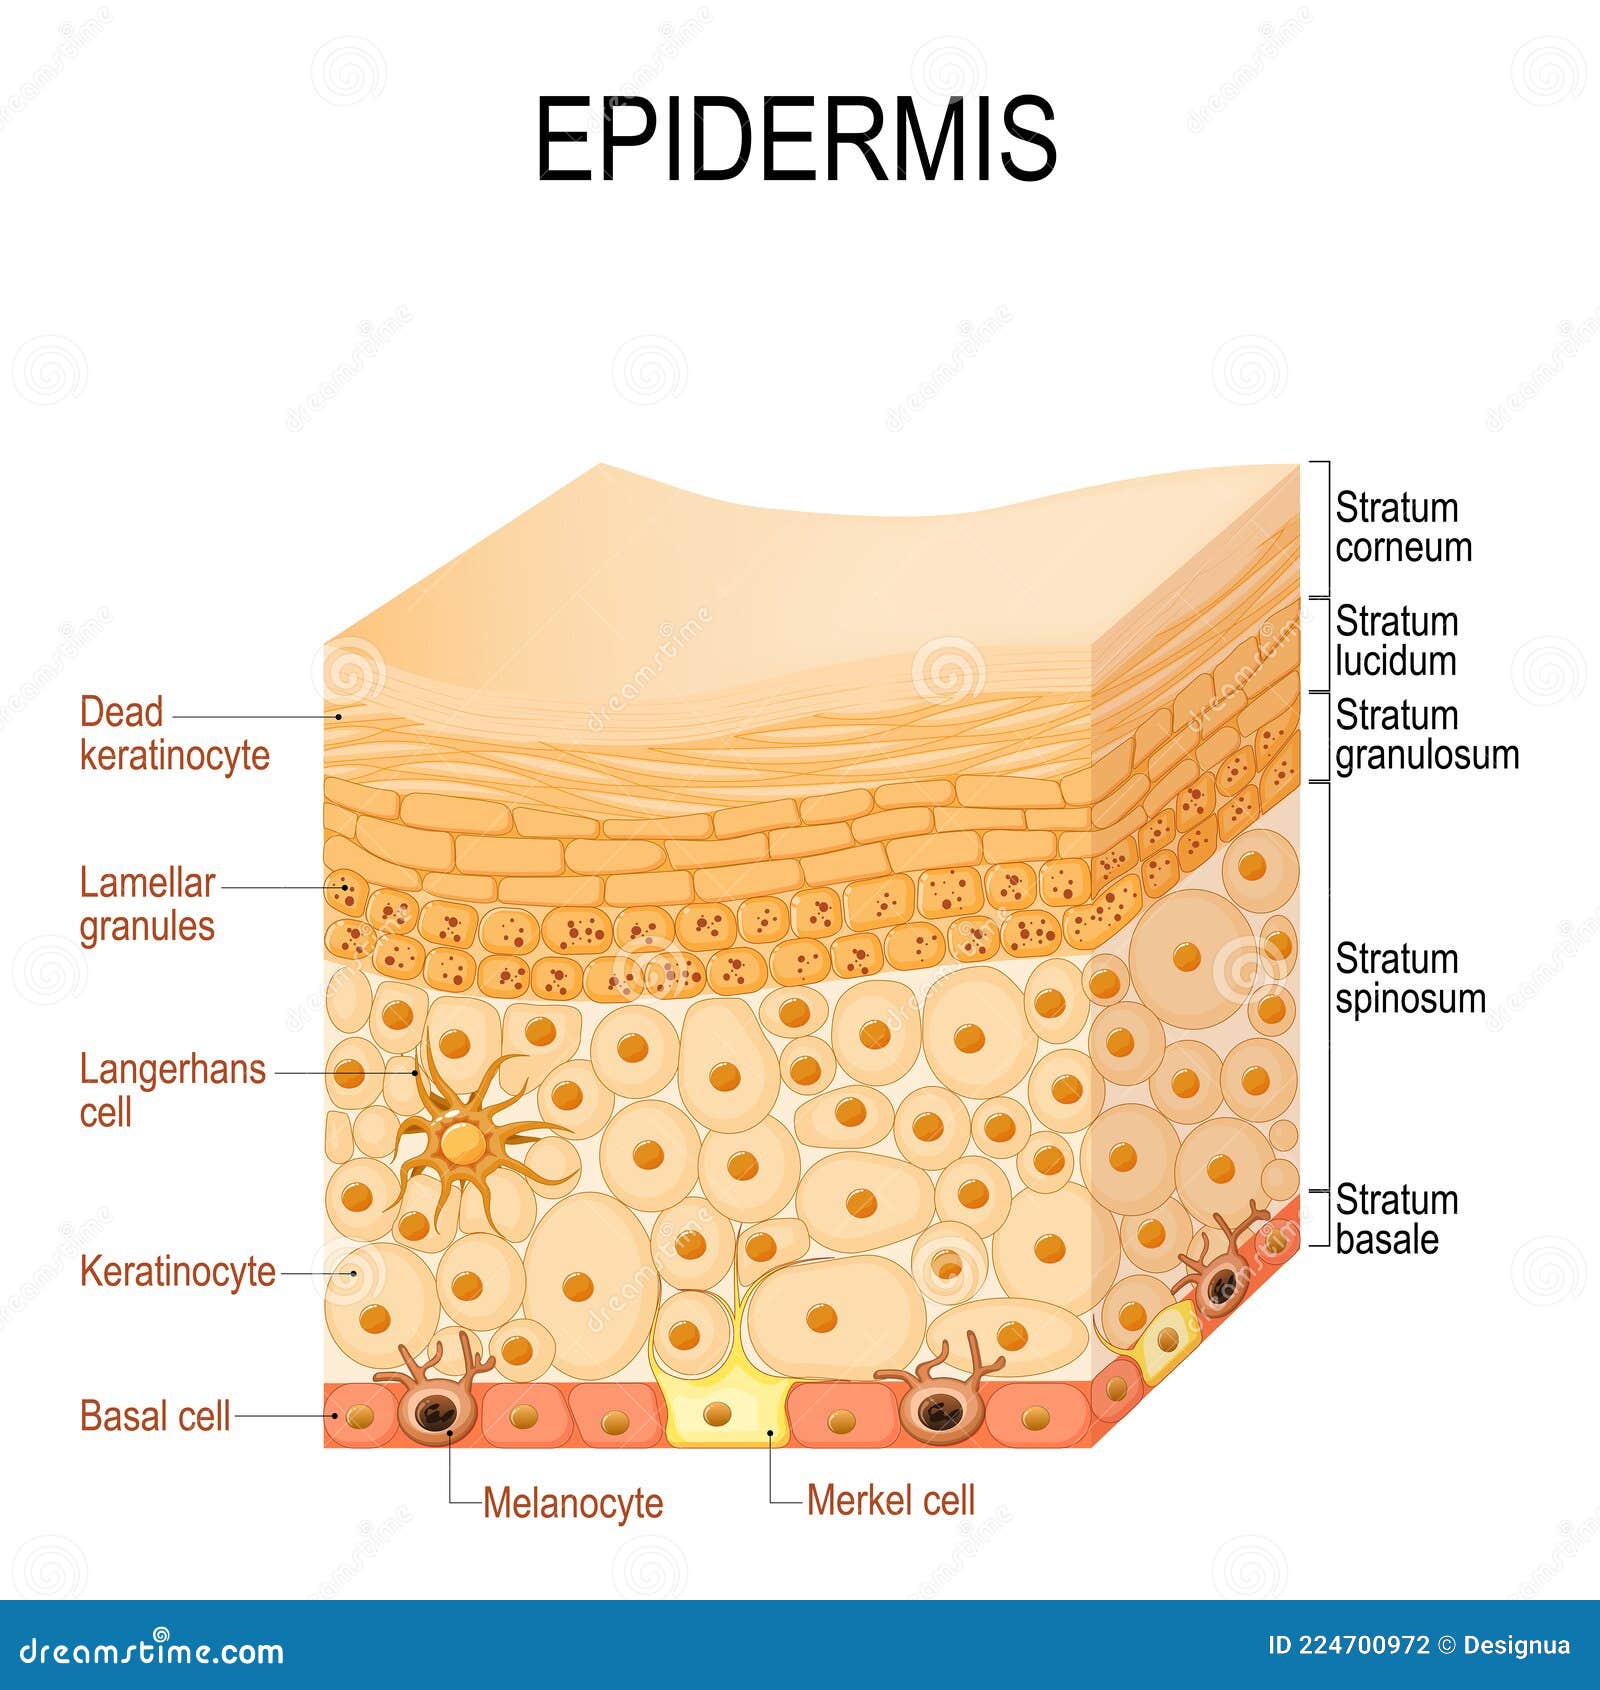 epidermis anatomy. layers and cell structure